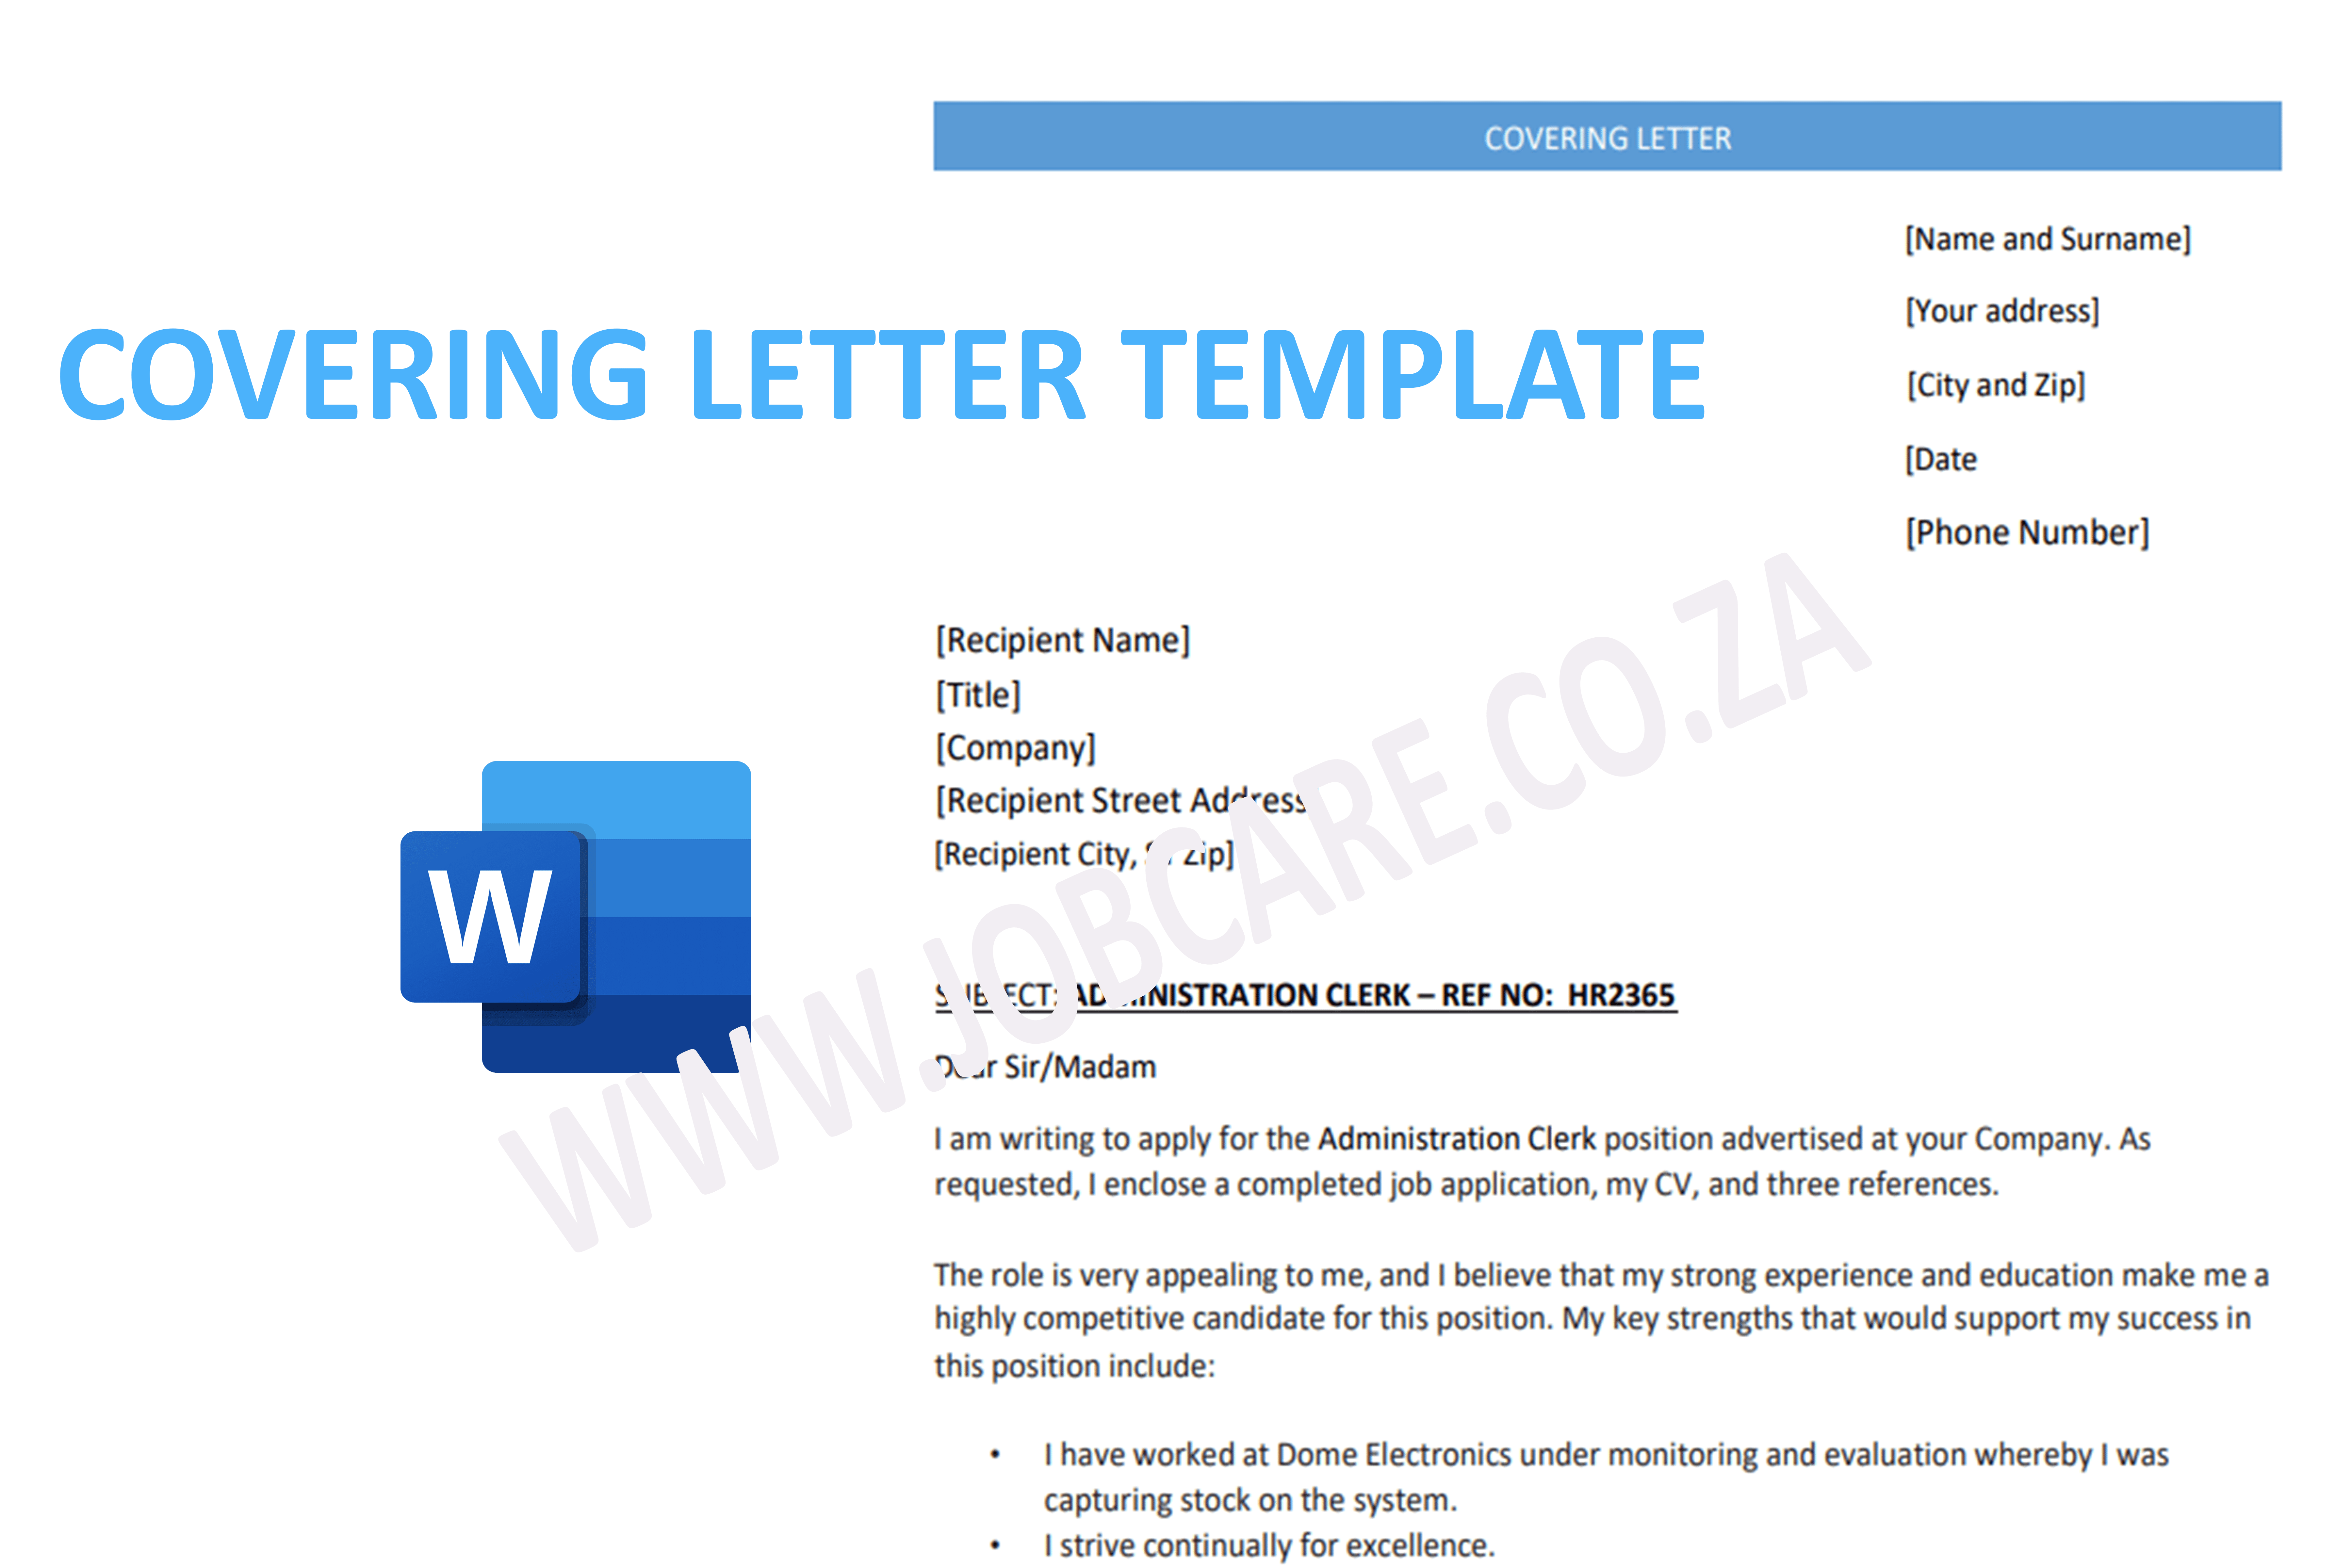 Cover Letter Template WORD